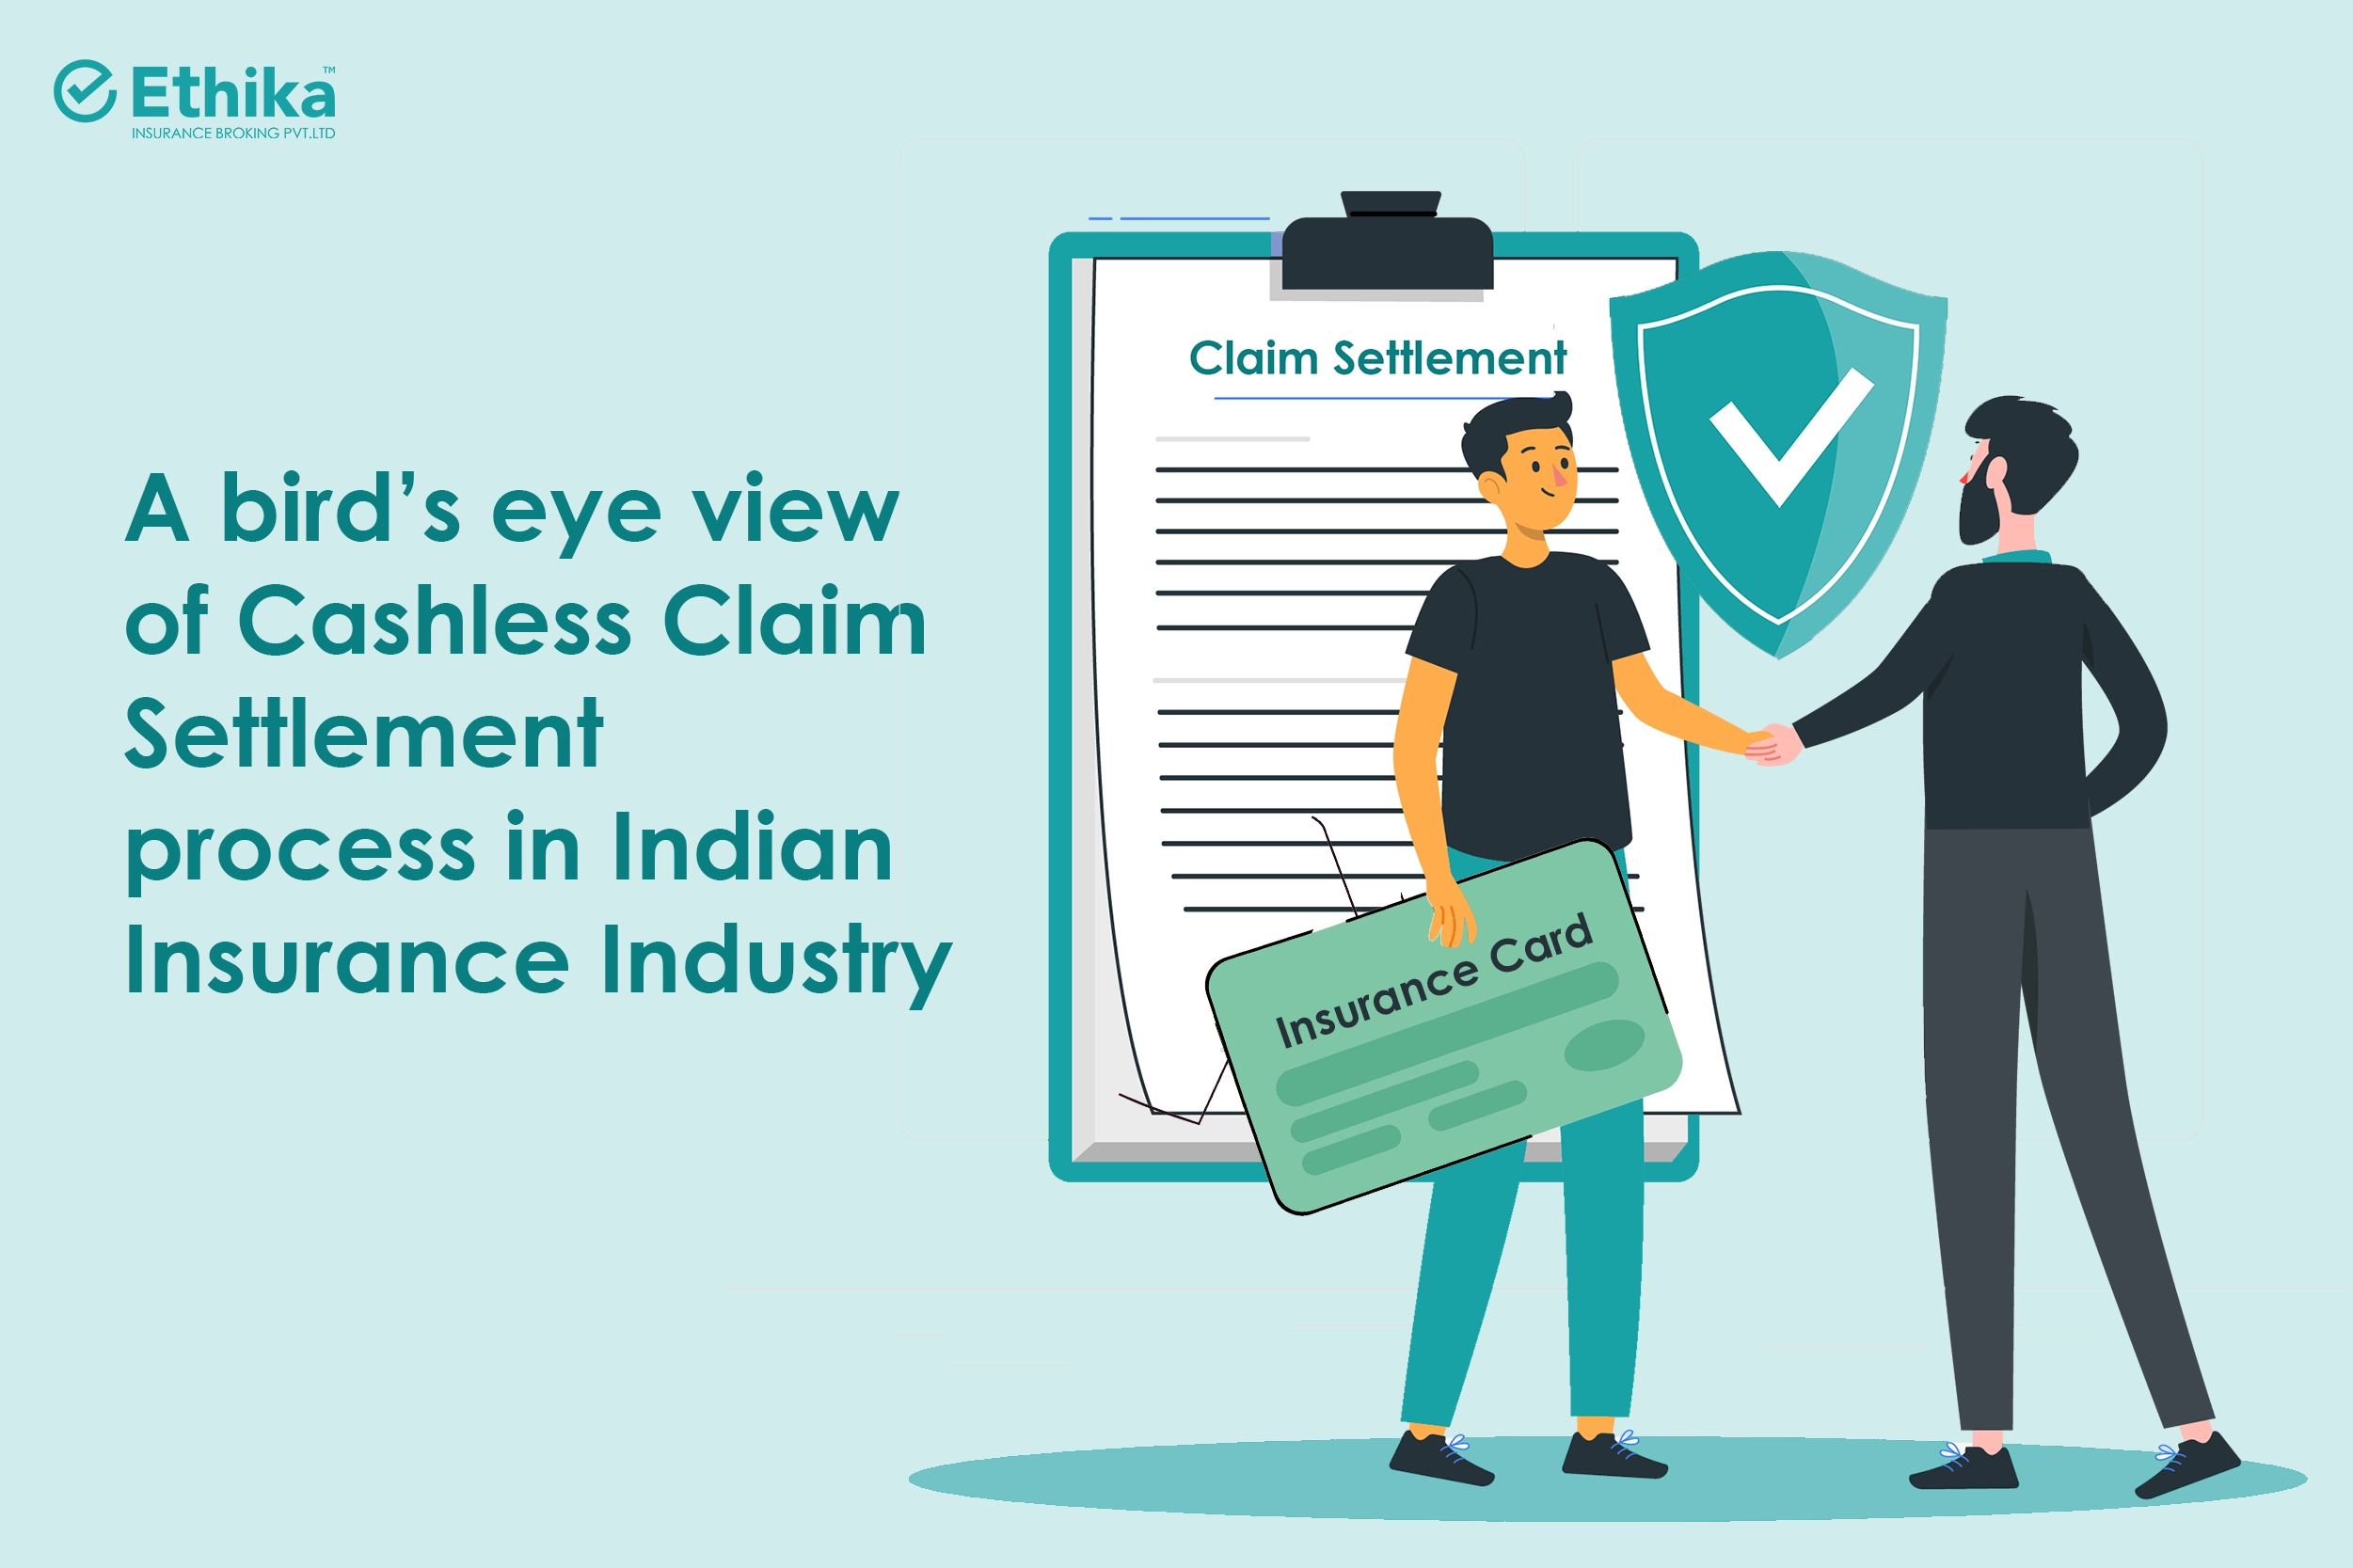 A bird’s eye view of Cashless Claim Settlement process in Indian Insurance Industry